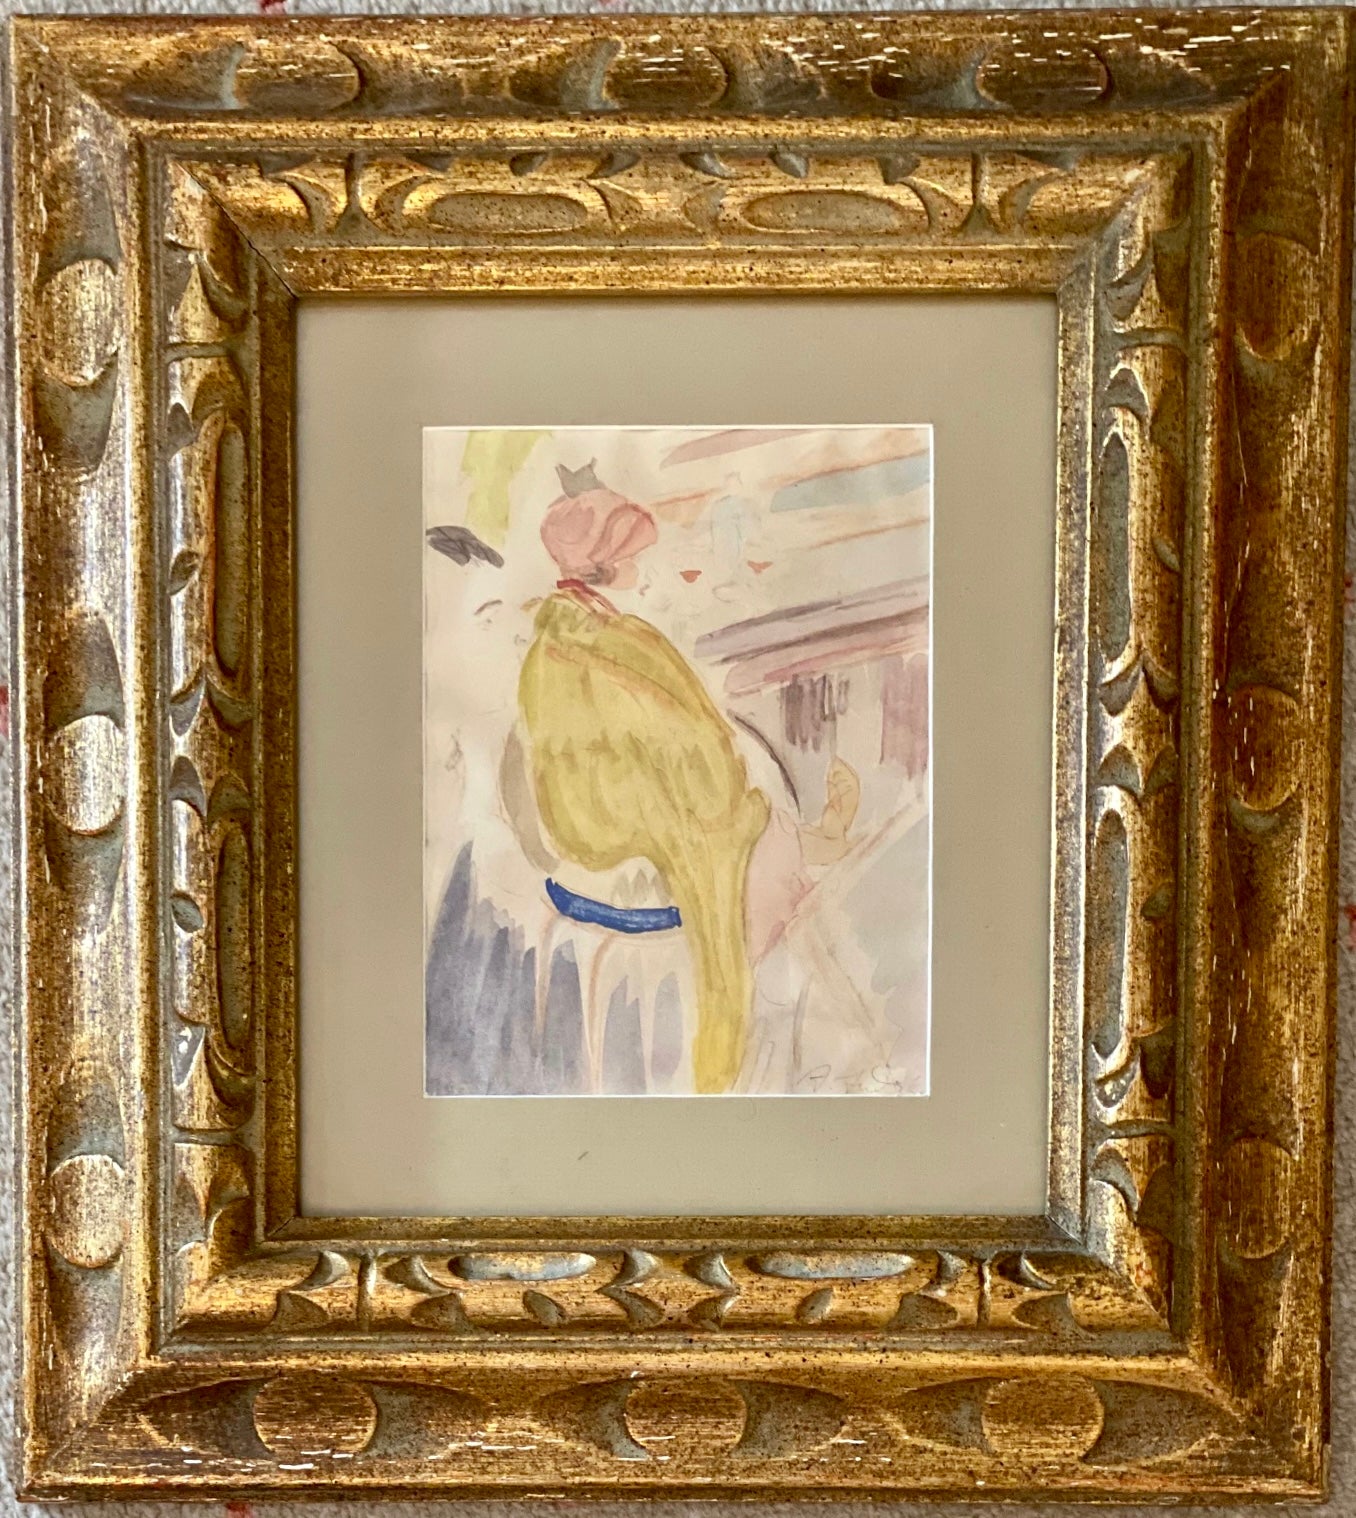 Framed watercolor by Albert Andre signed lower right.
Measures 17